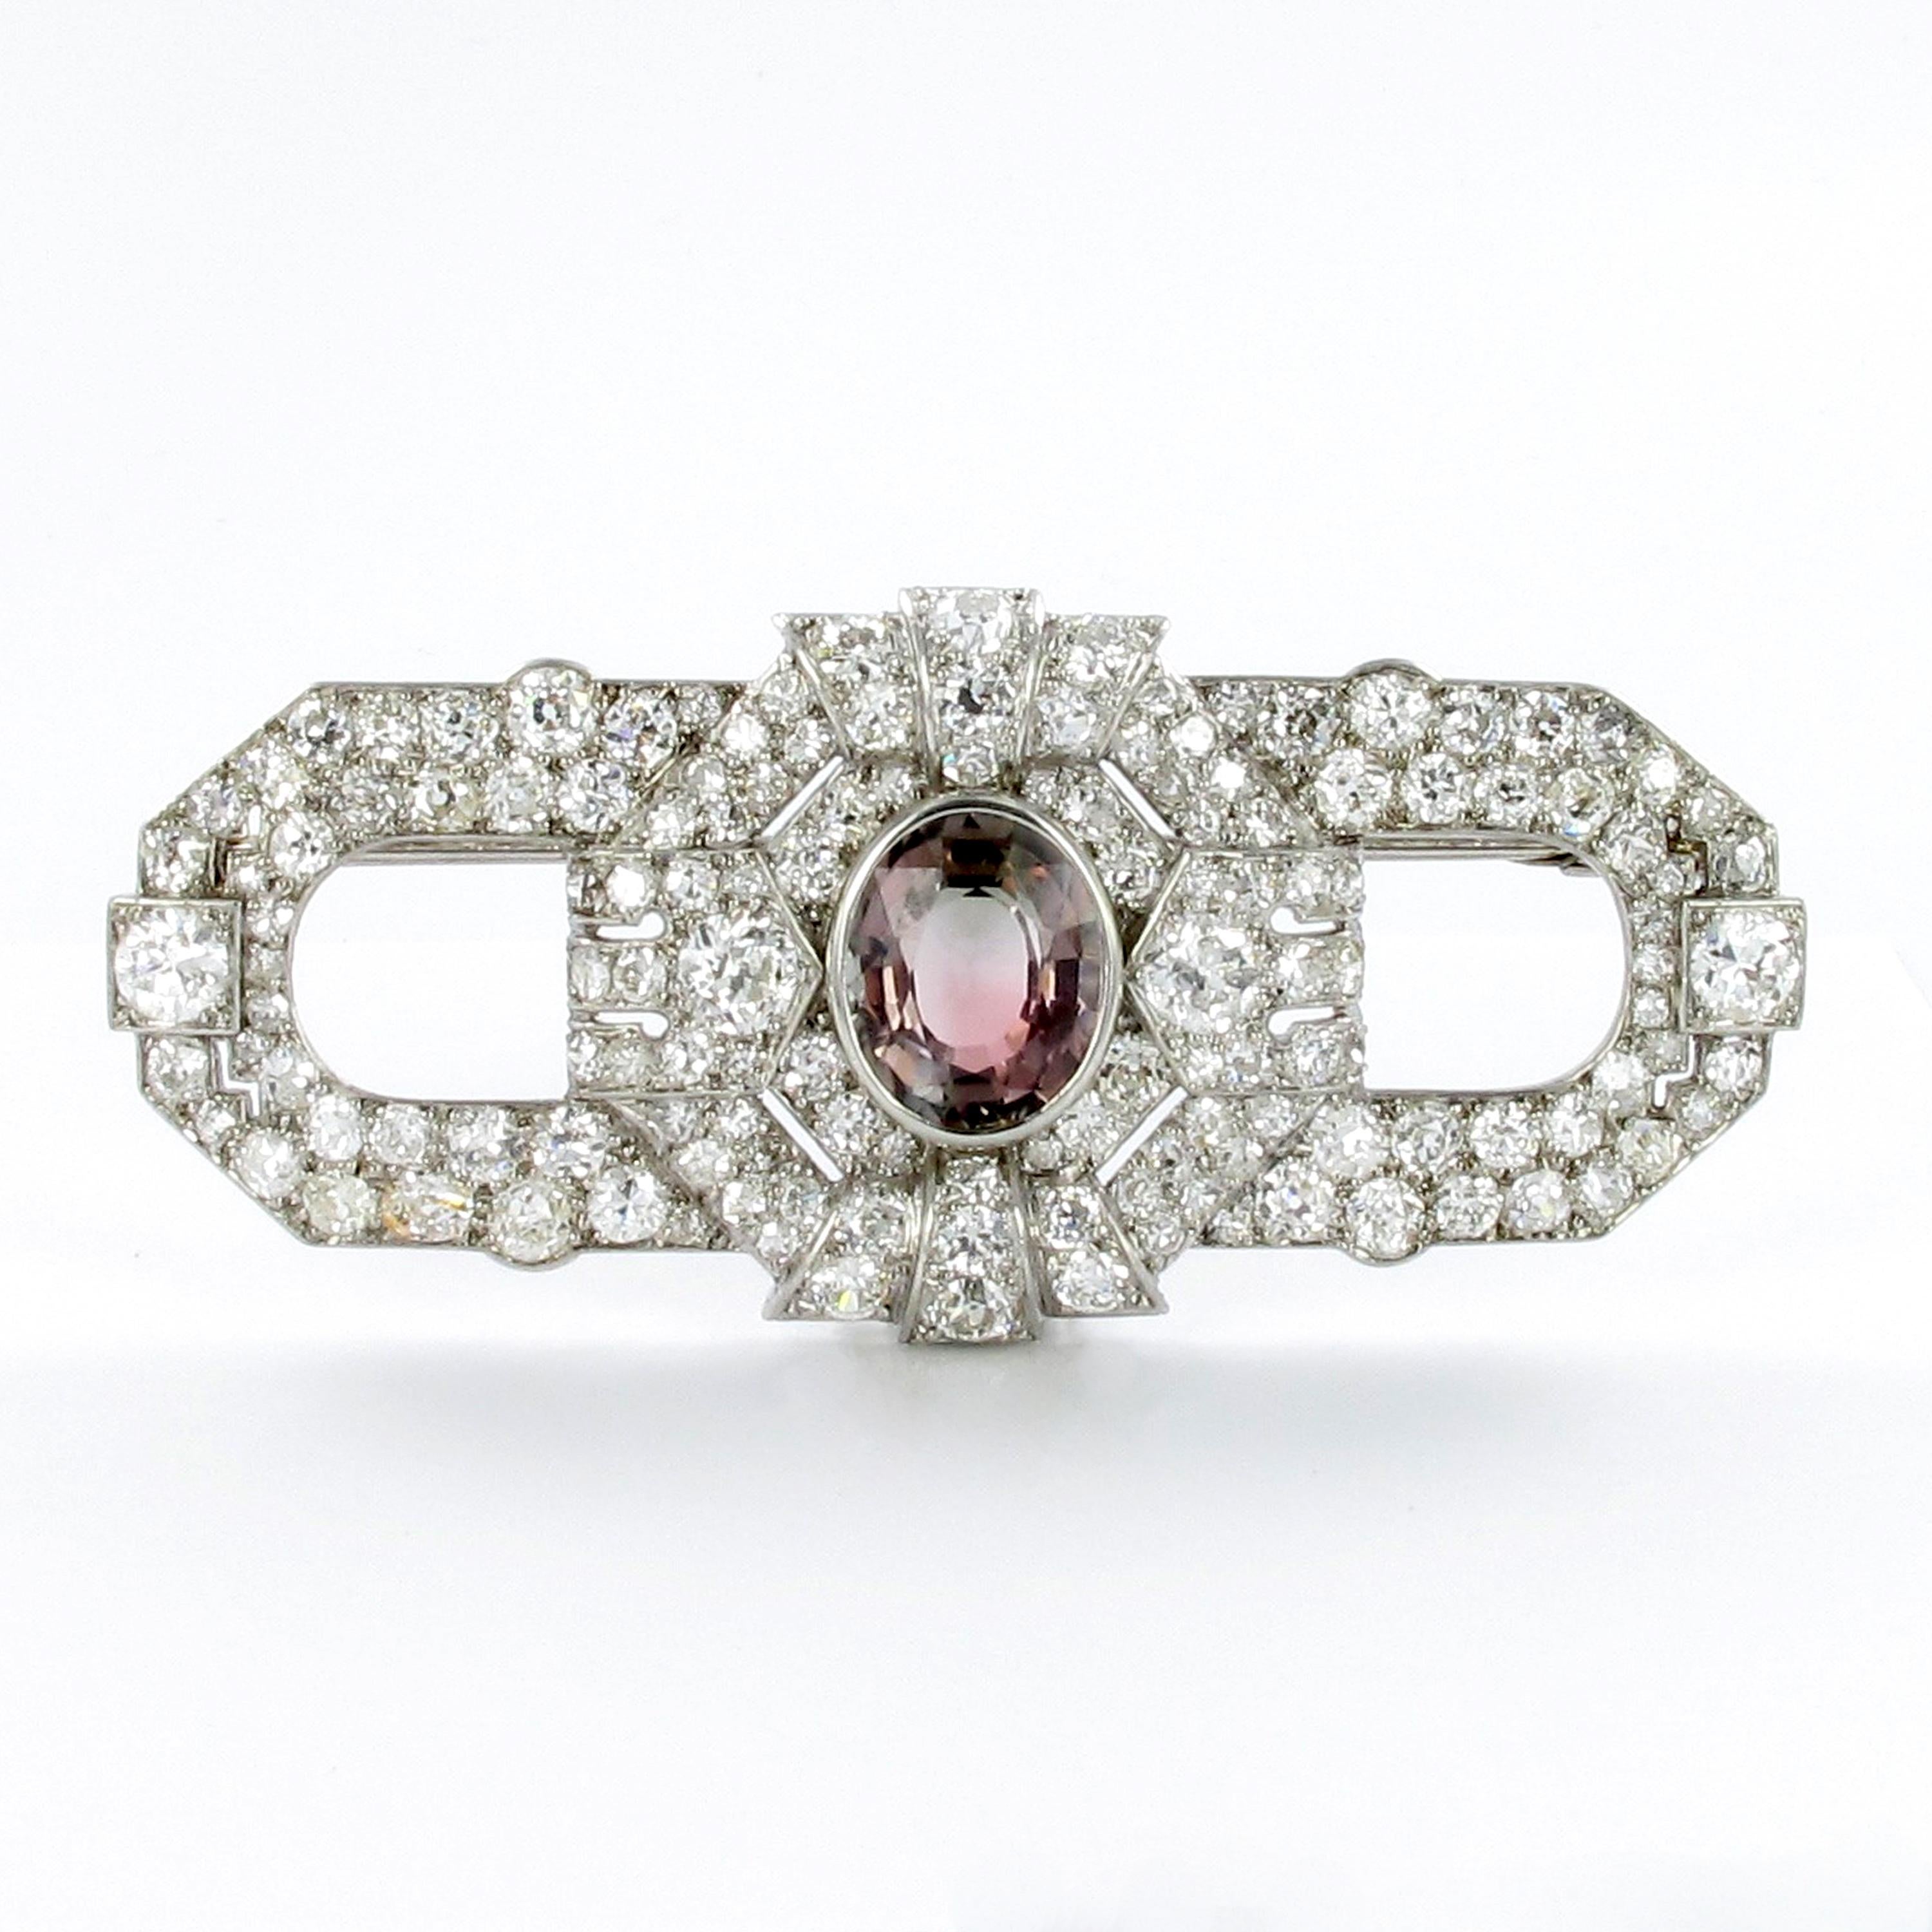 Decorative platinum brooch from the Art Déco period. Bezel set with a bicolor tourmaline of approximate 6 ct displaying peach and brow color…… Further set with 4 old European cut diamonds totaling 1.60 ct, finished with 138 old cut diamonds of